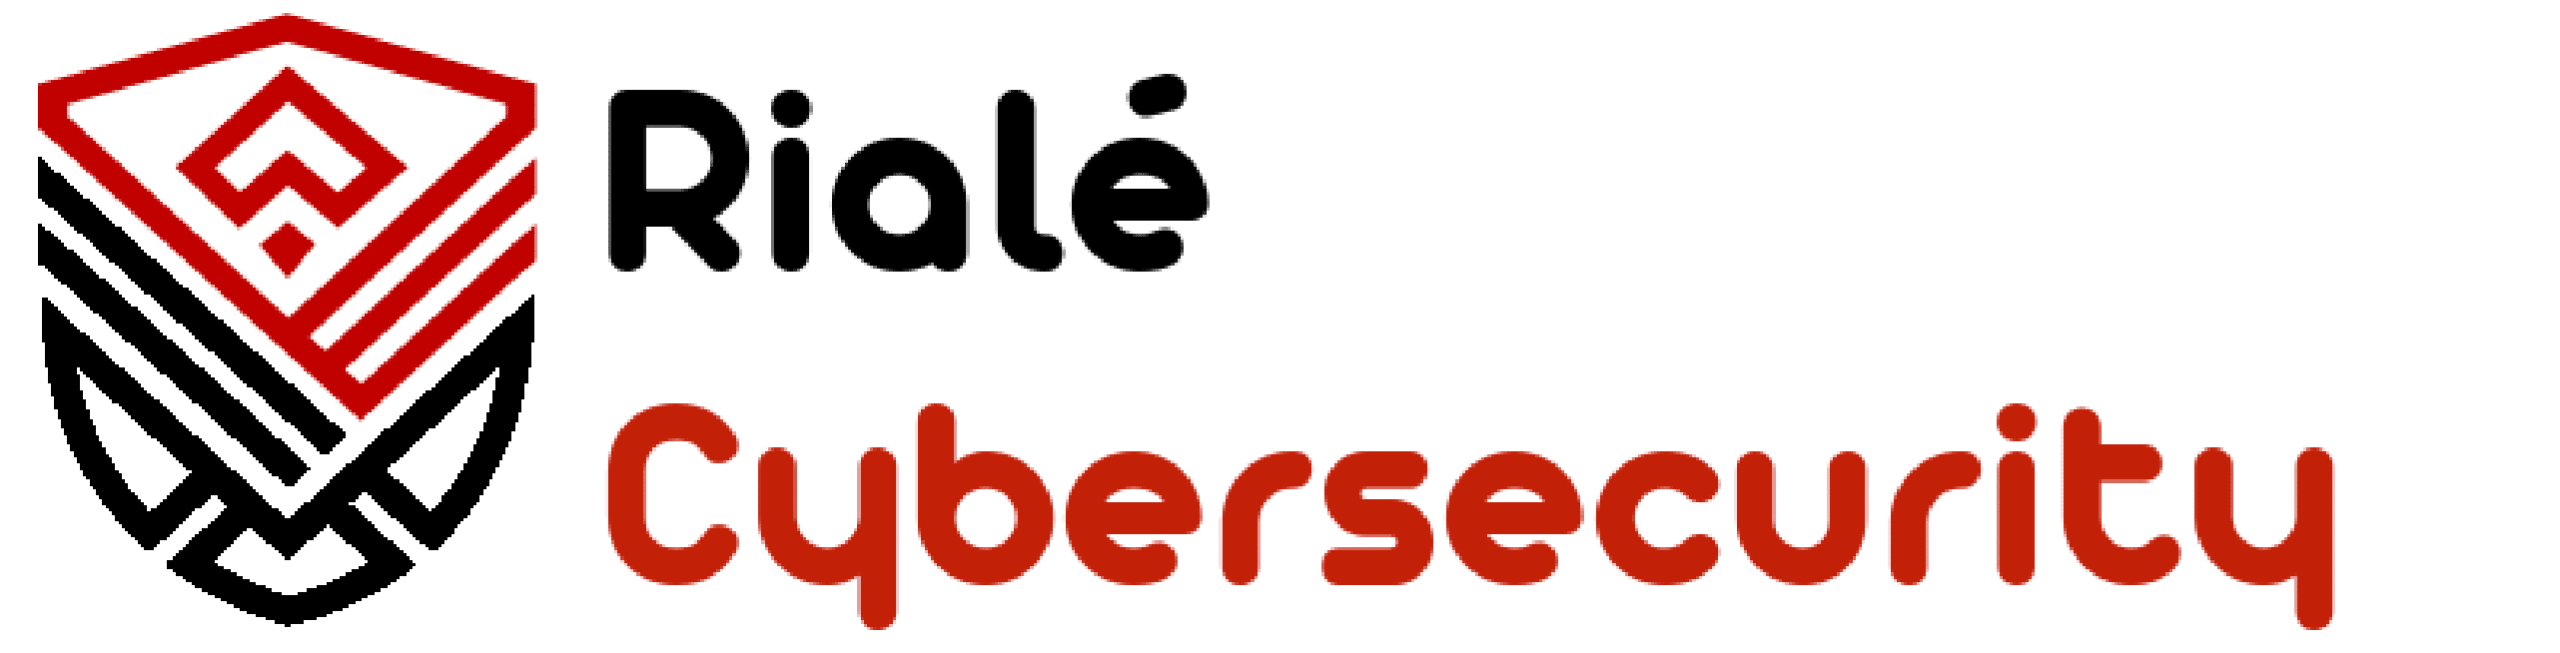 Riale Cybersecurity